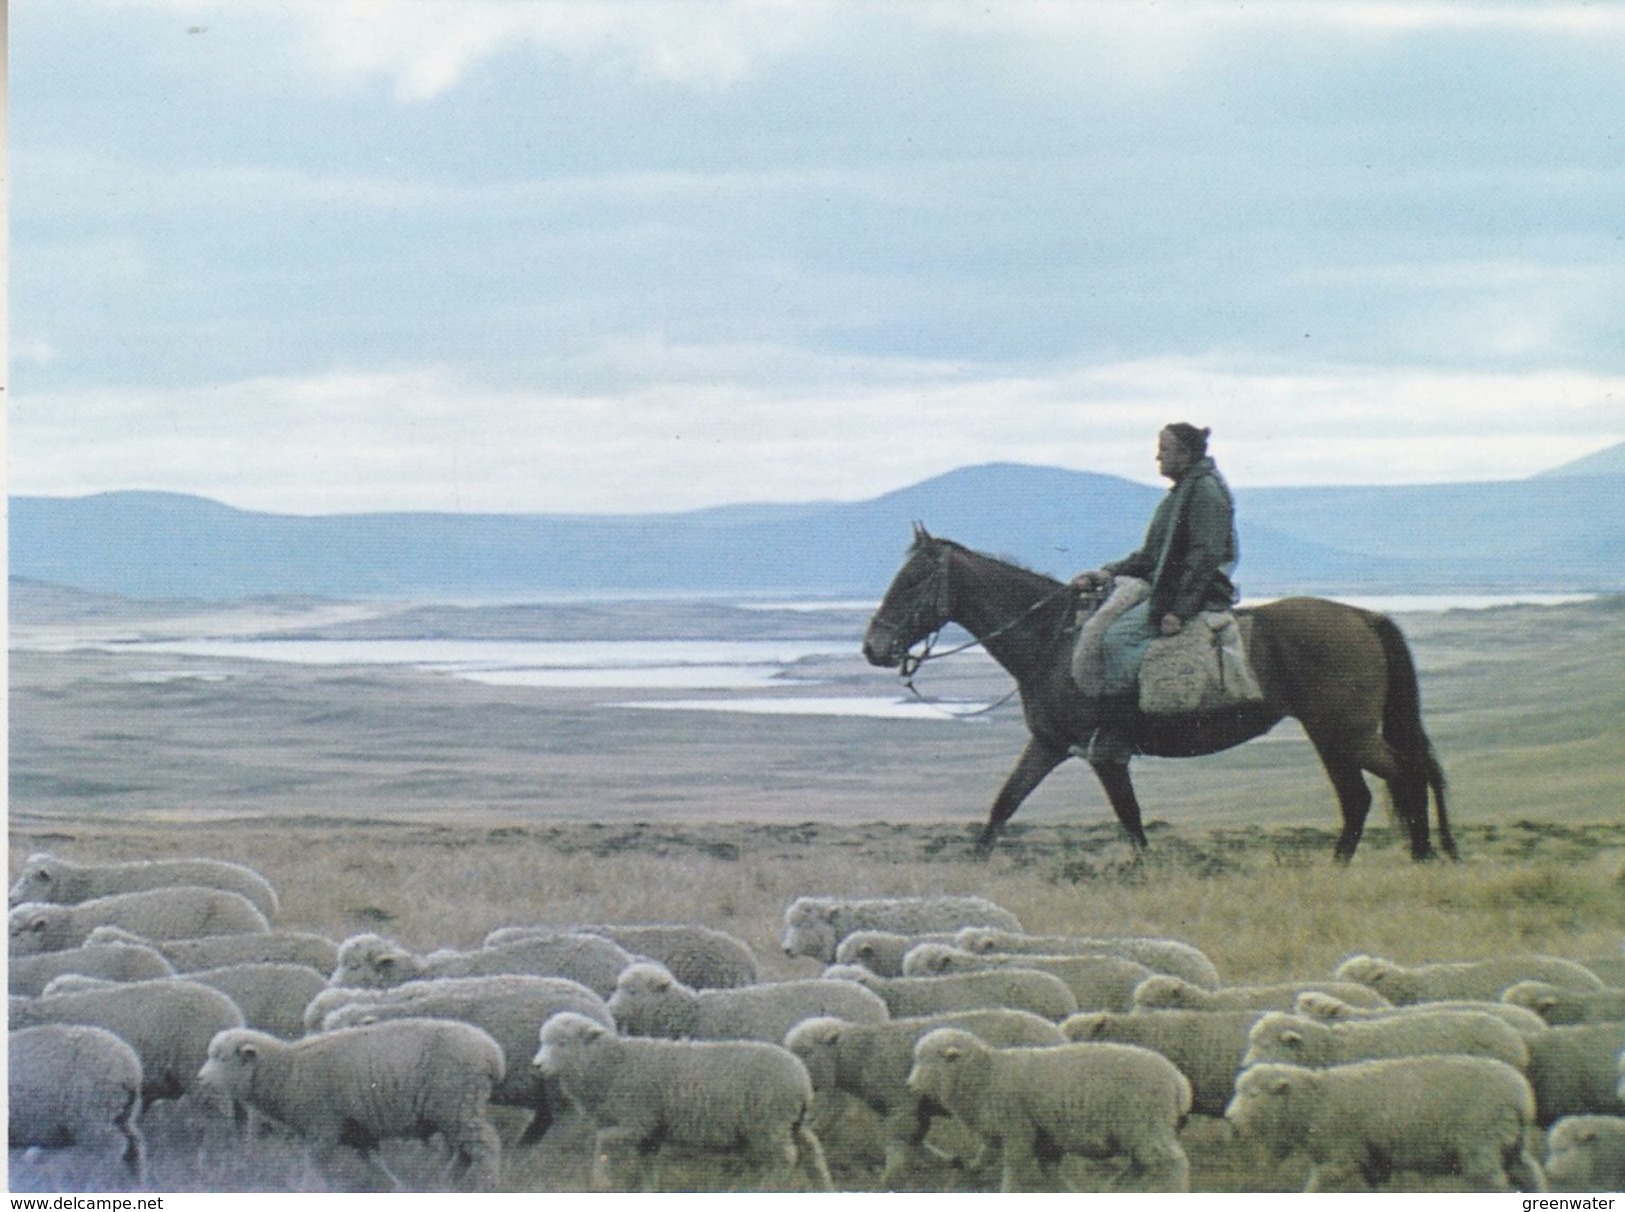 Falkland Islands Fred Coutts Driving Lambs In West Falklands  Postcard Unused (36834) - Falkland Islands